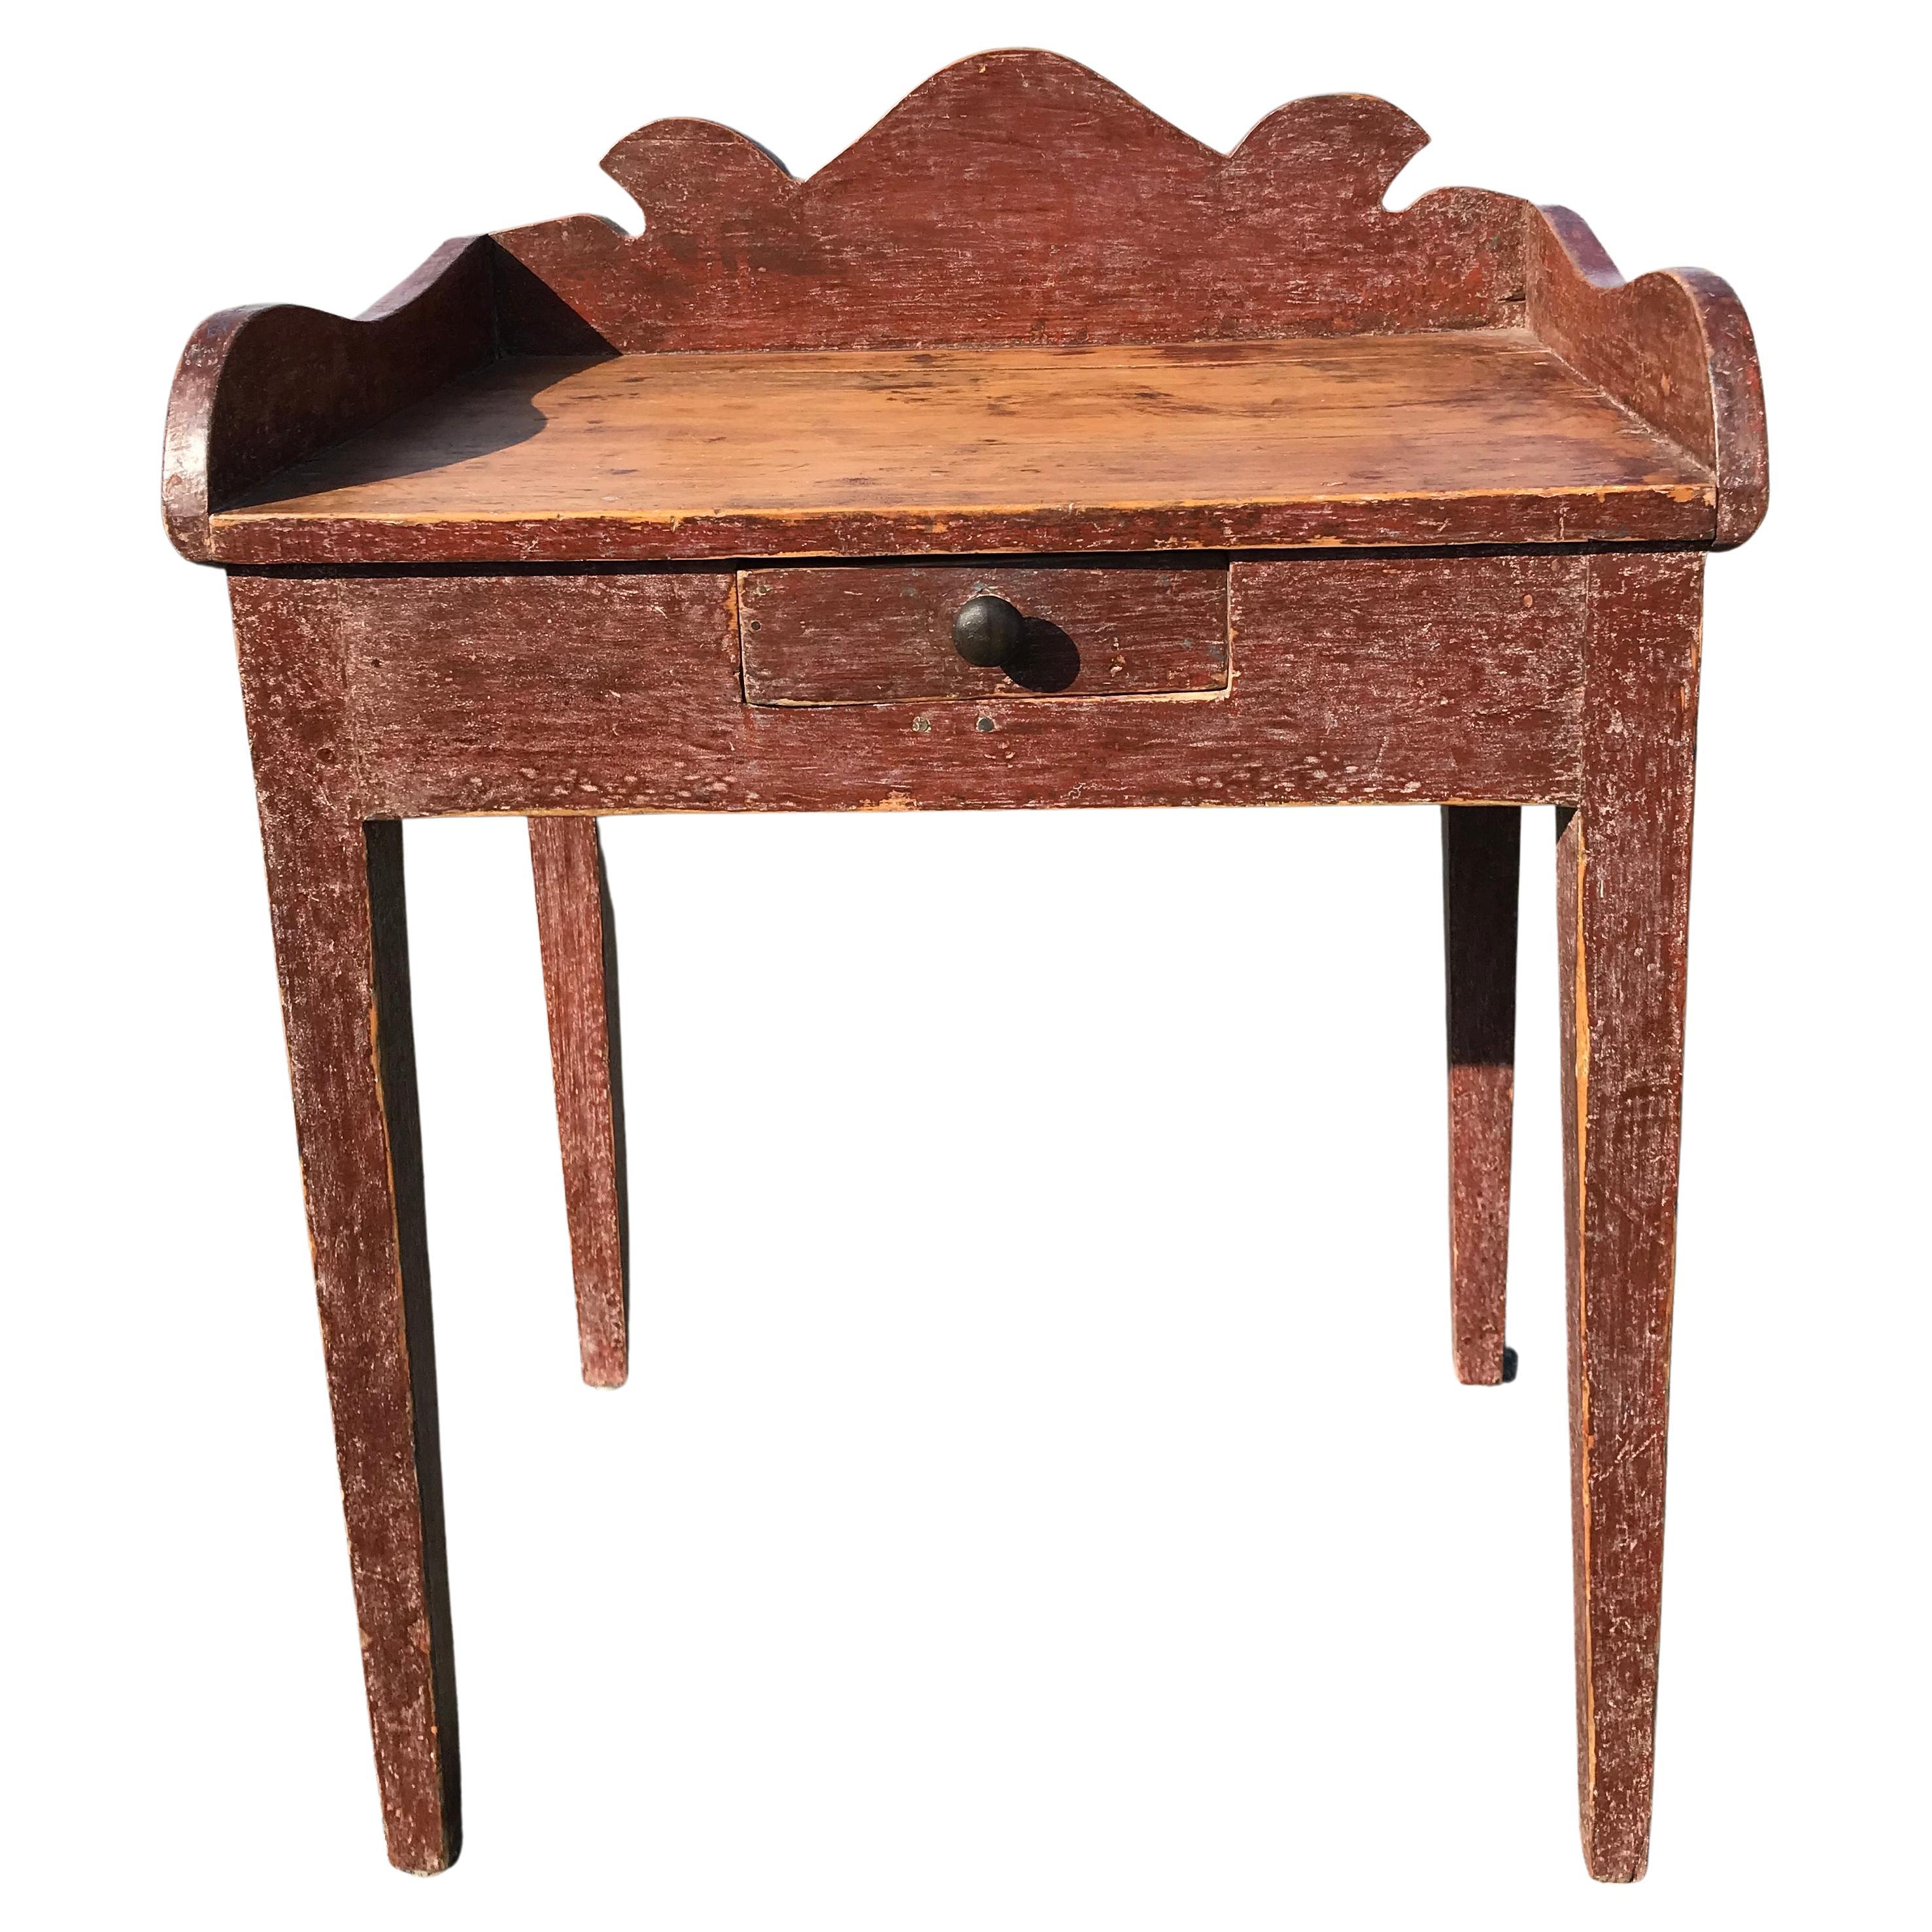 19th Century Washstand with Shaped Backsplash in Old Red Paint